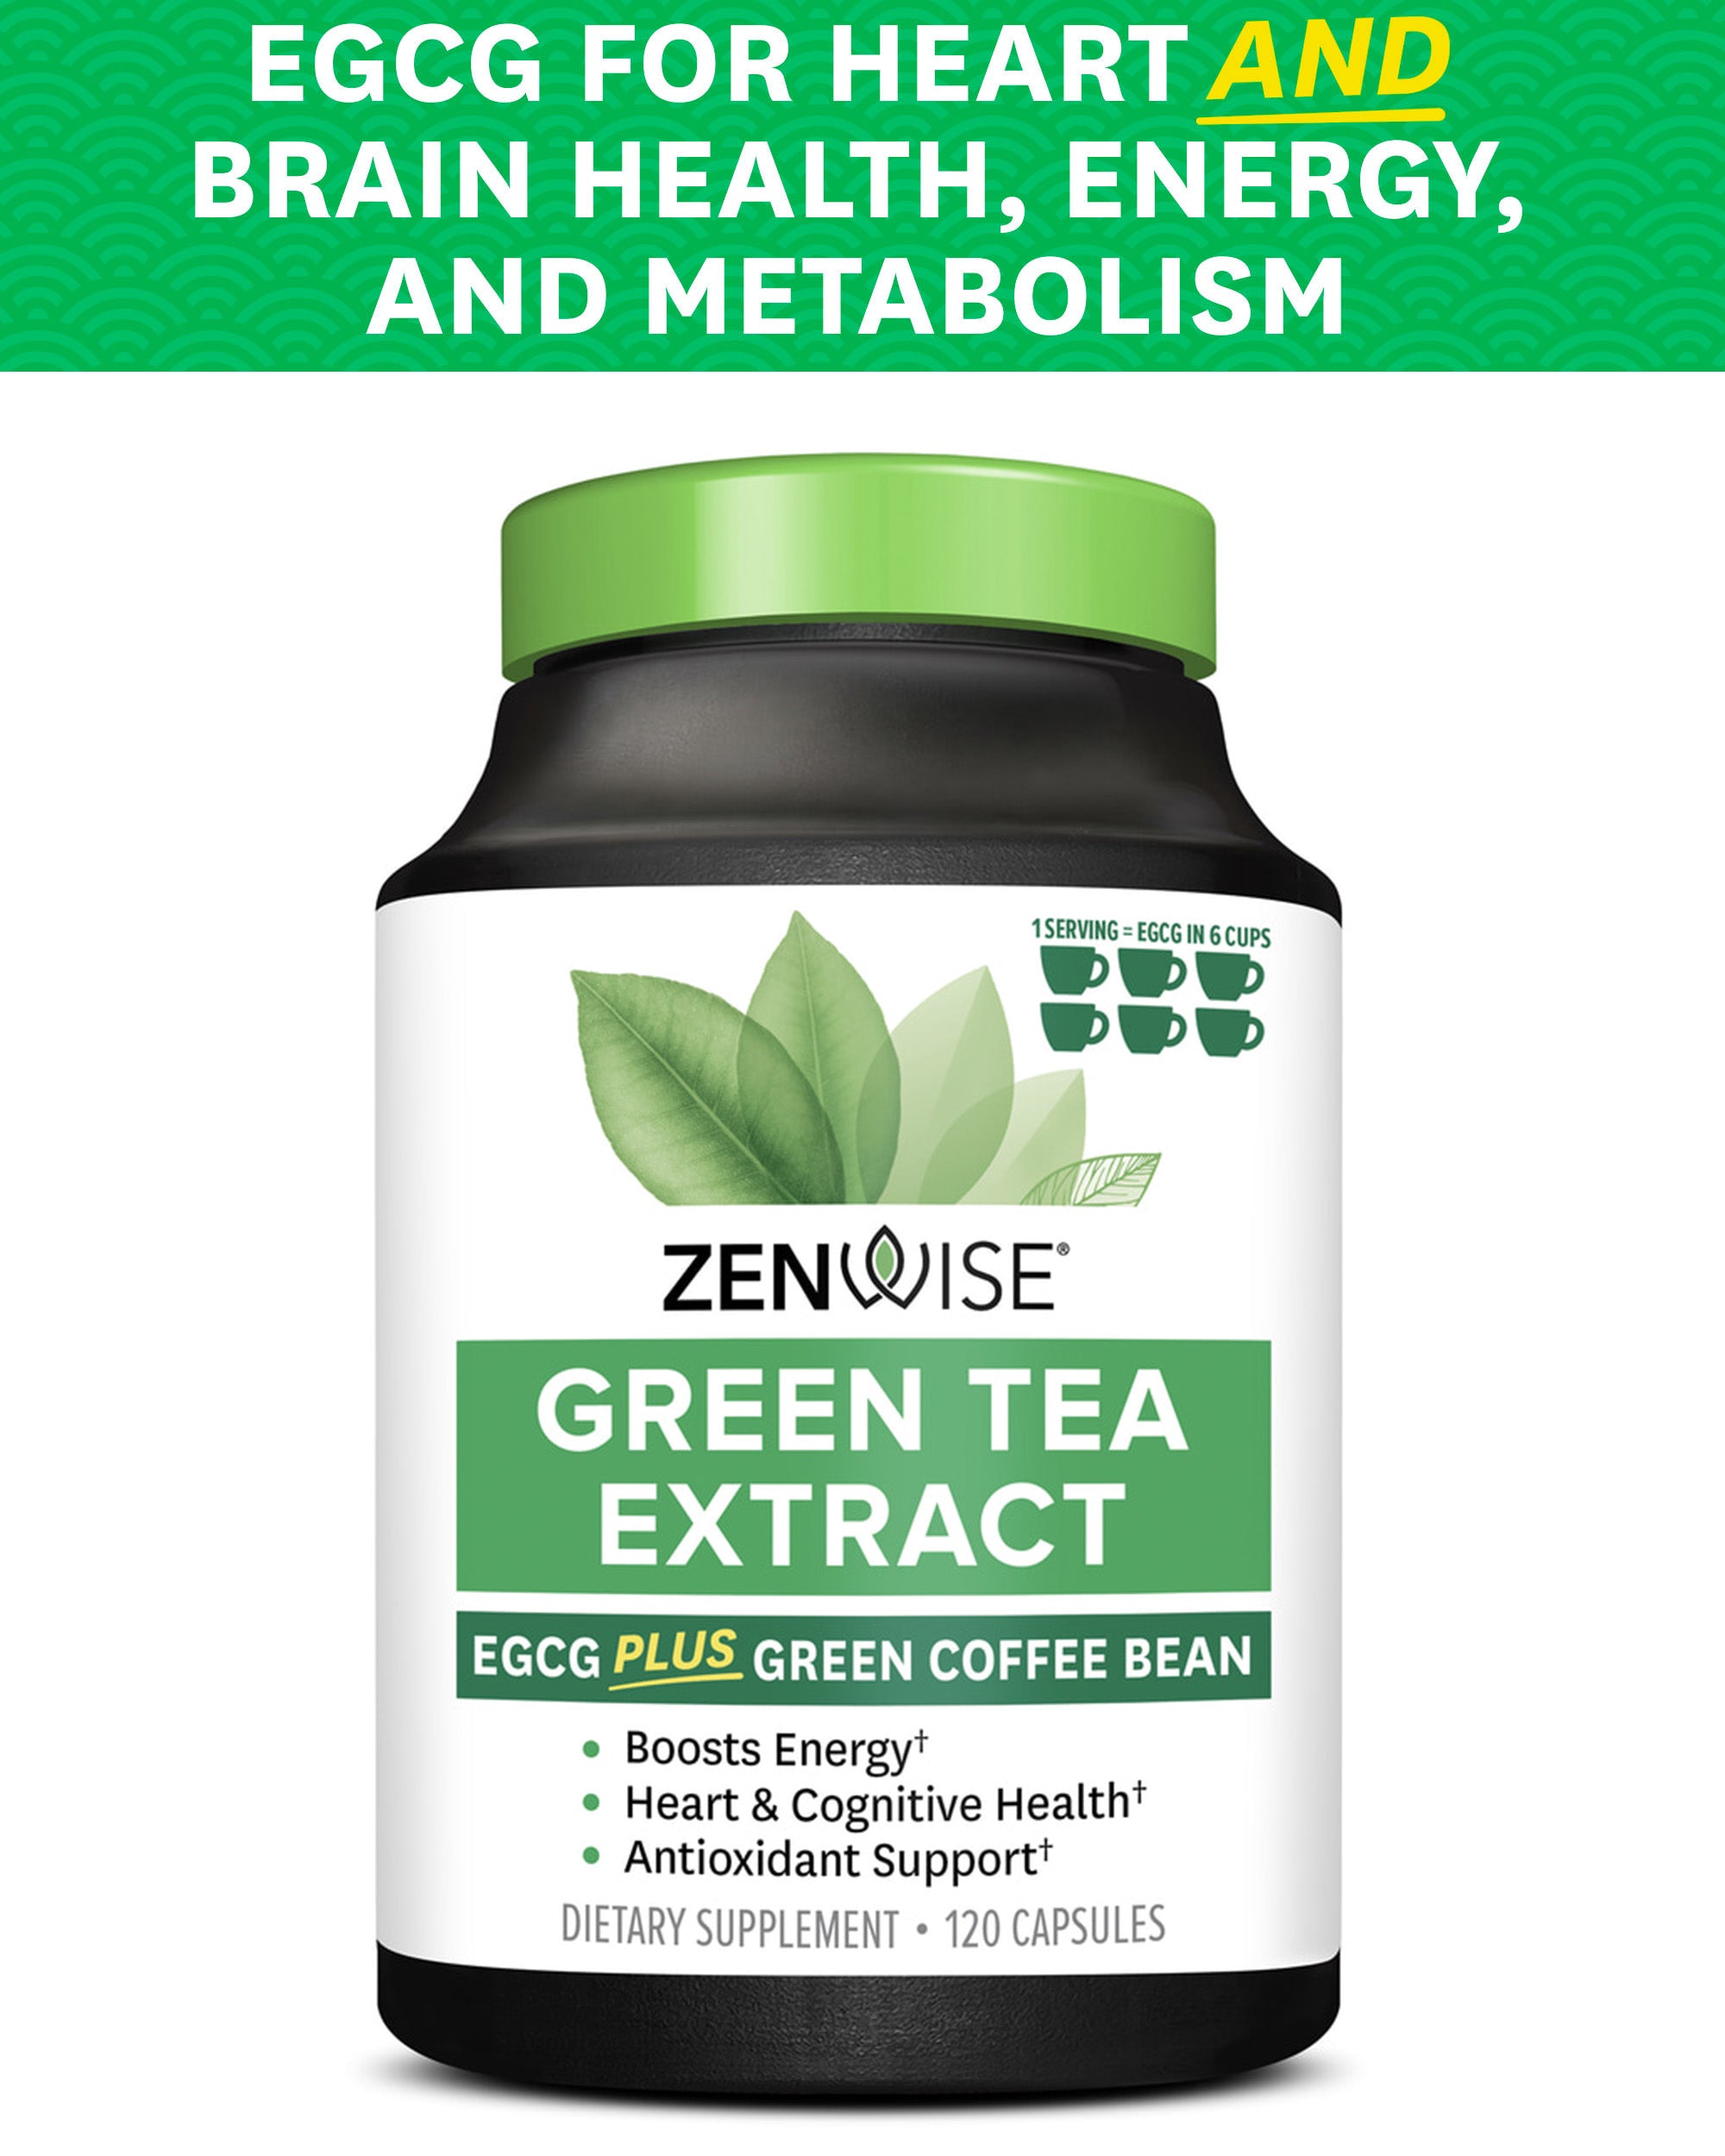 Green tea extract for energy